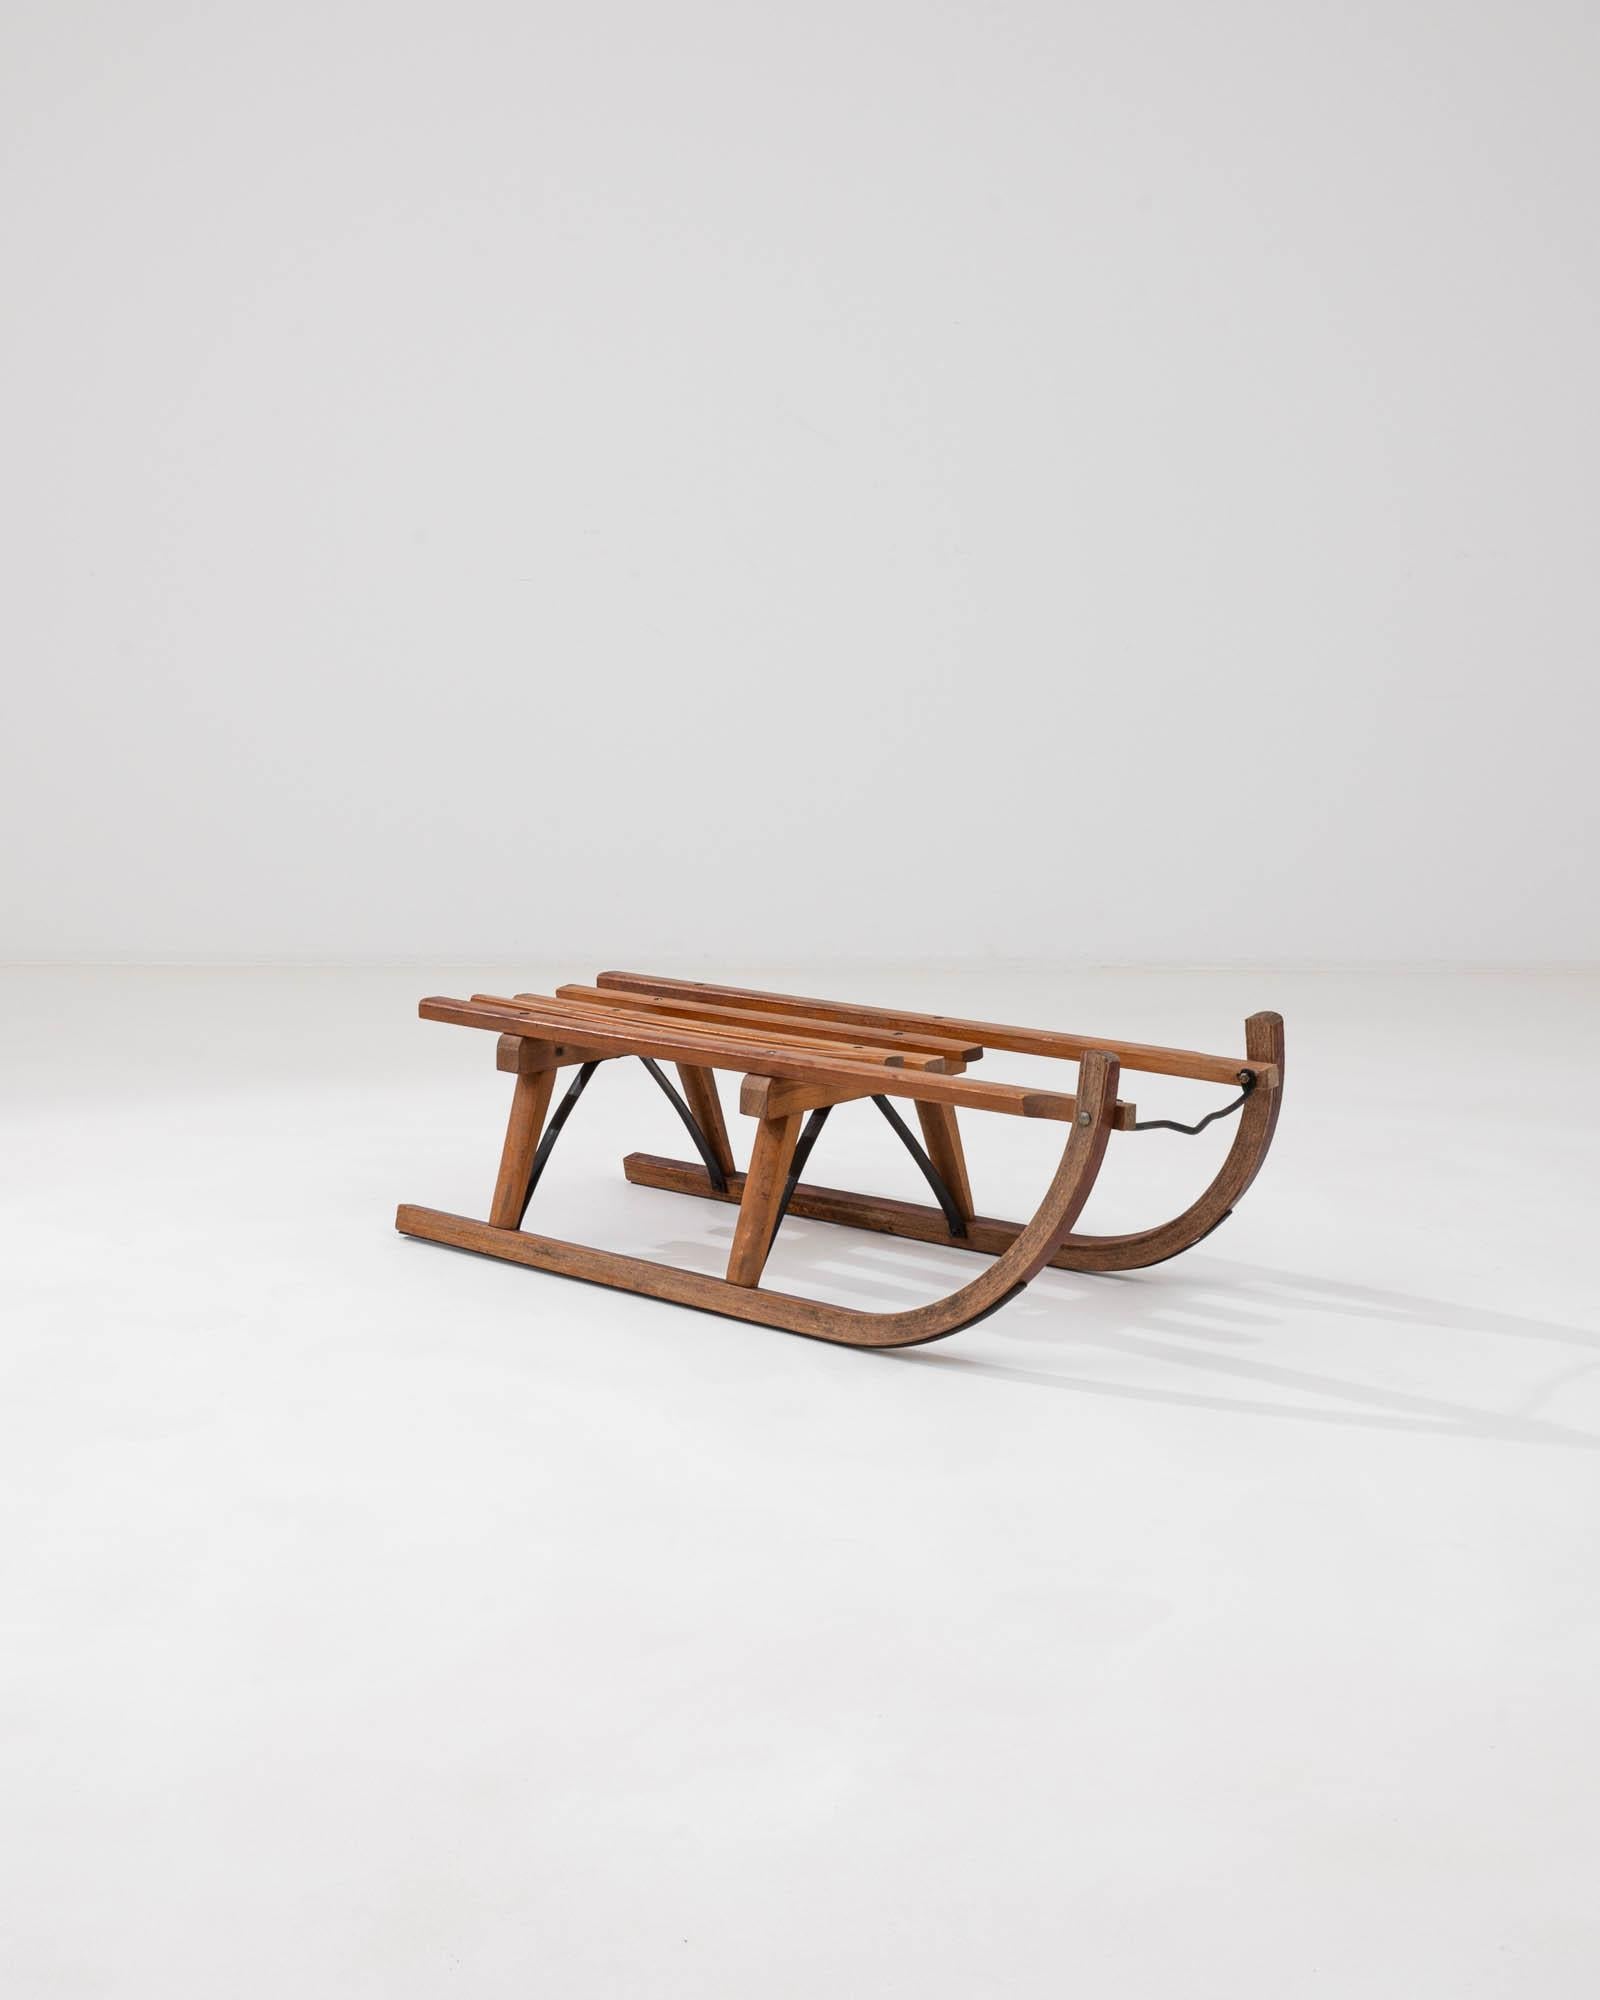 Introducing a remarkable piece of winter's past: the 20th Century German Wooden Sled by Davos. A nostalgic tribute to the snowy days of yore, this sled is a genuine collector's item, evoking the simple joy of gliding over a fresh blanket of snow.